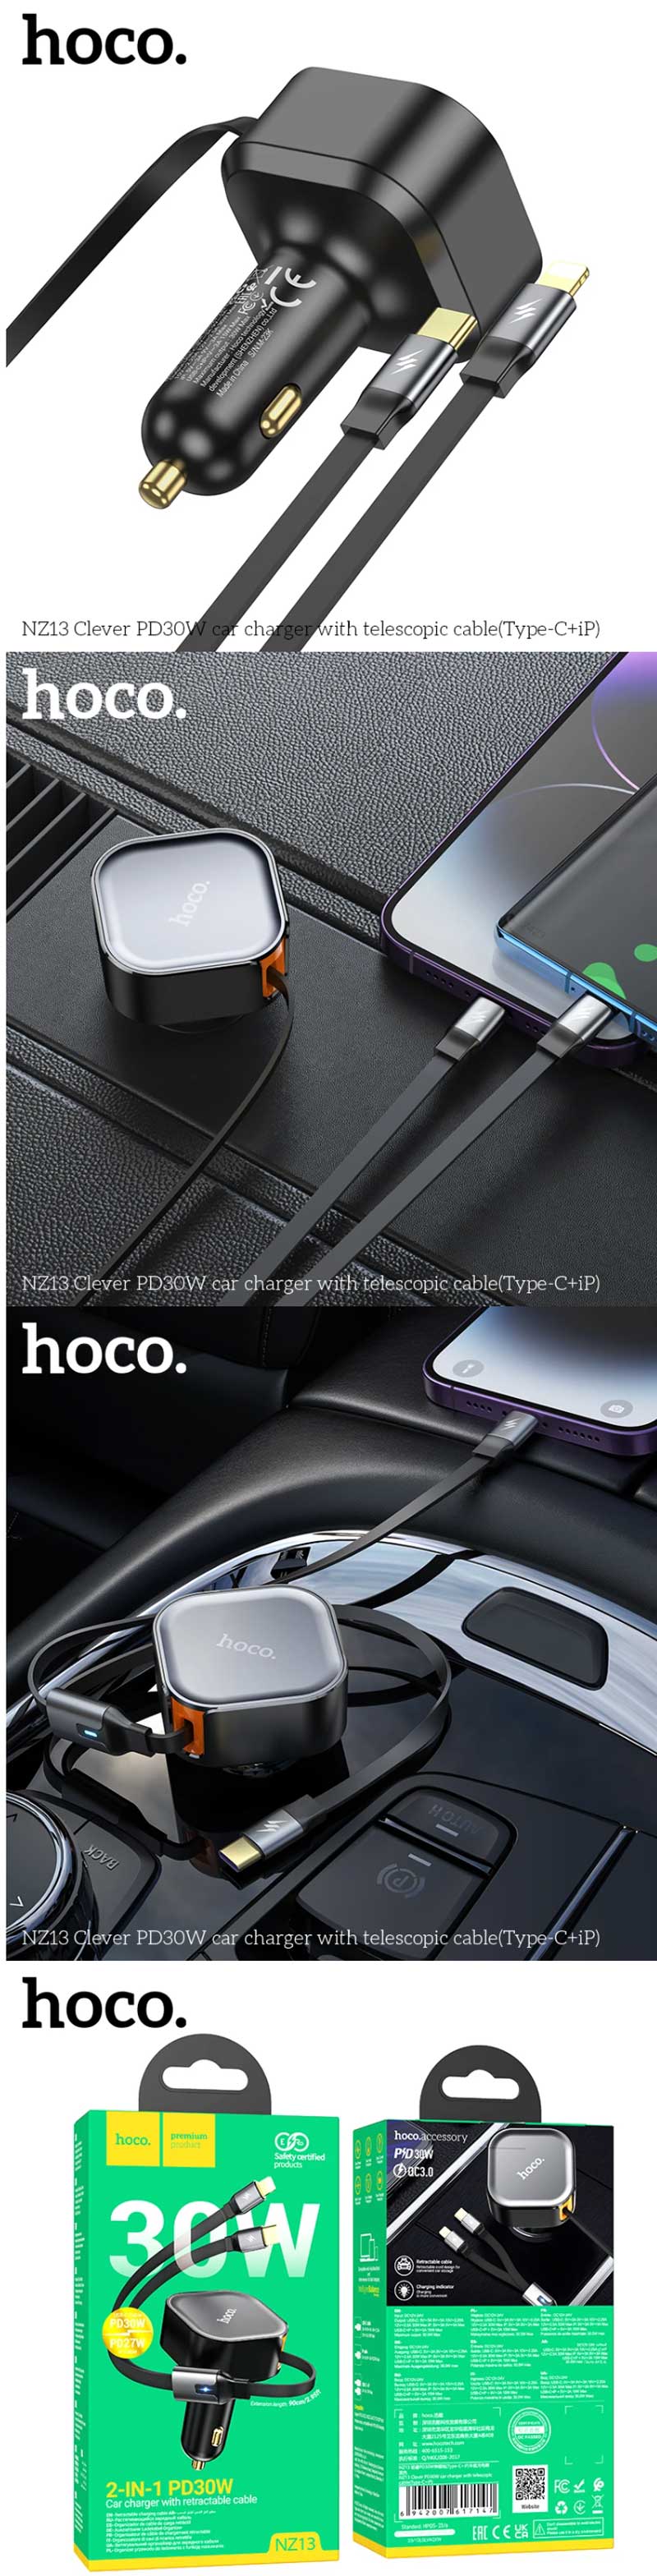 Hoco NZ13 PD30w 2 in 1 Car Charger with Retractable Cable